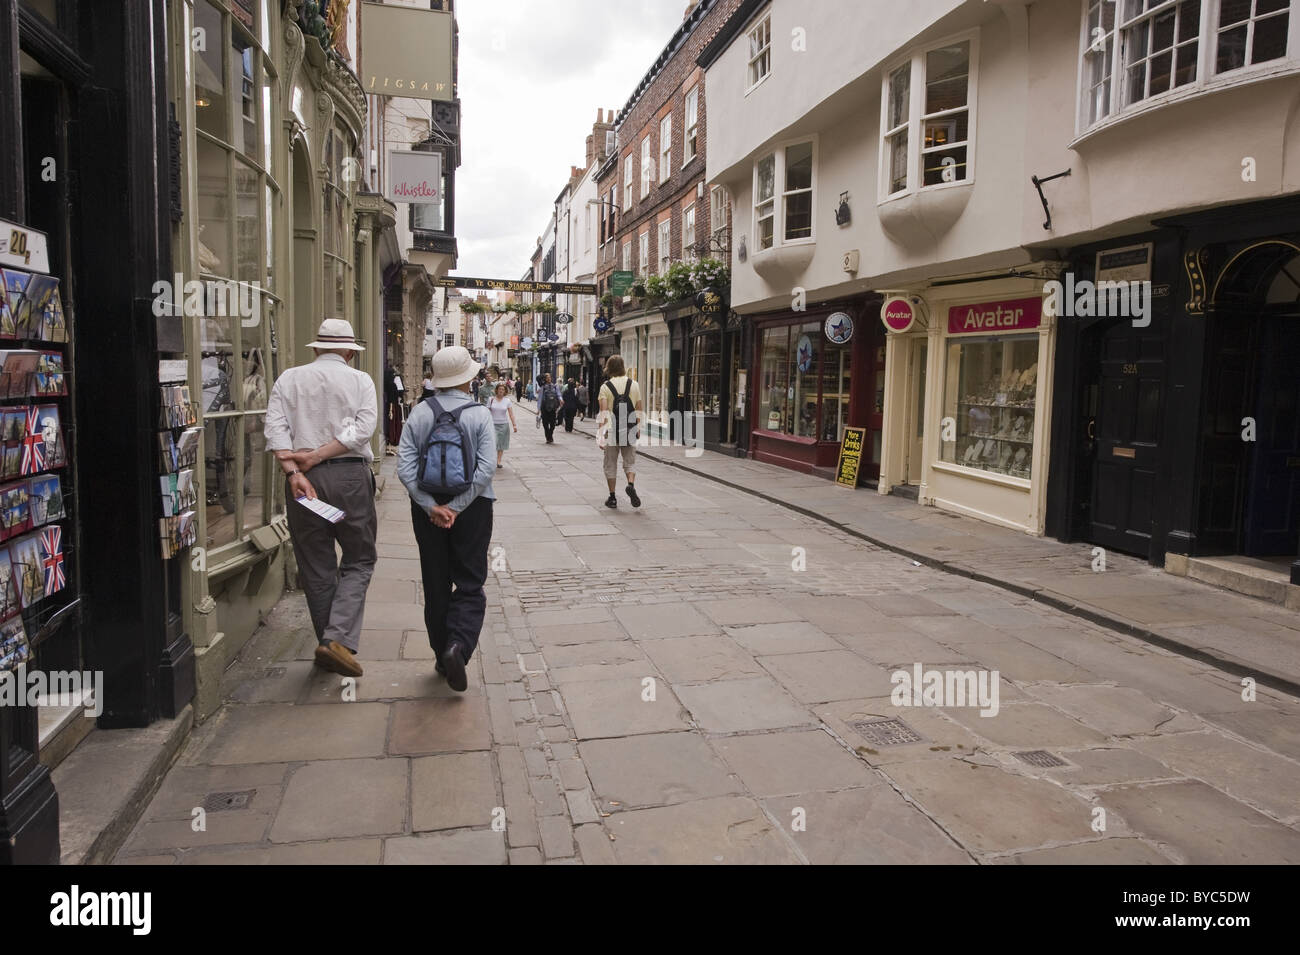 A view looking down Stonegate, York. Stock Photo